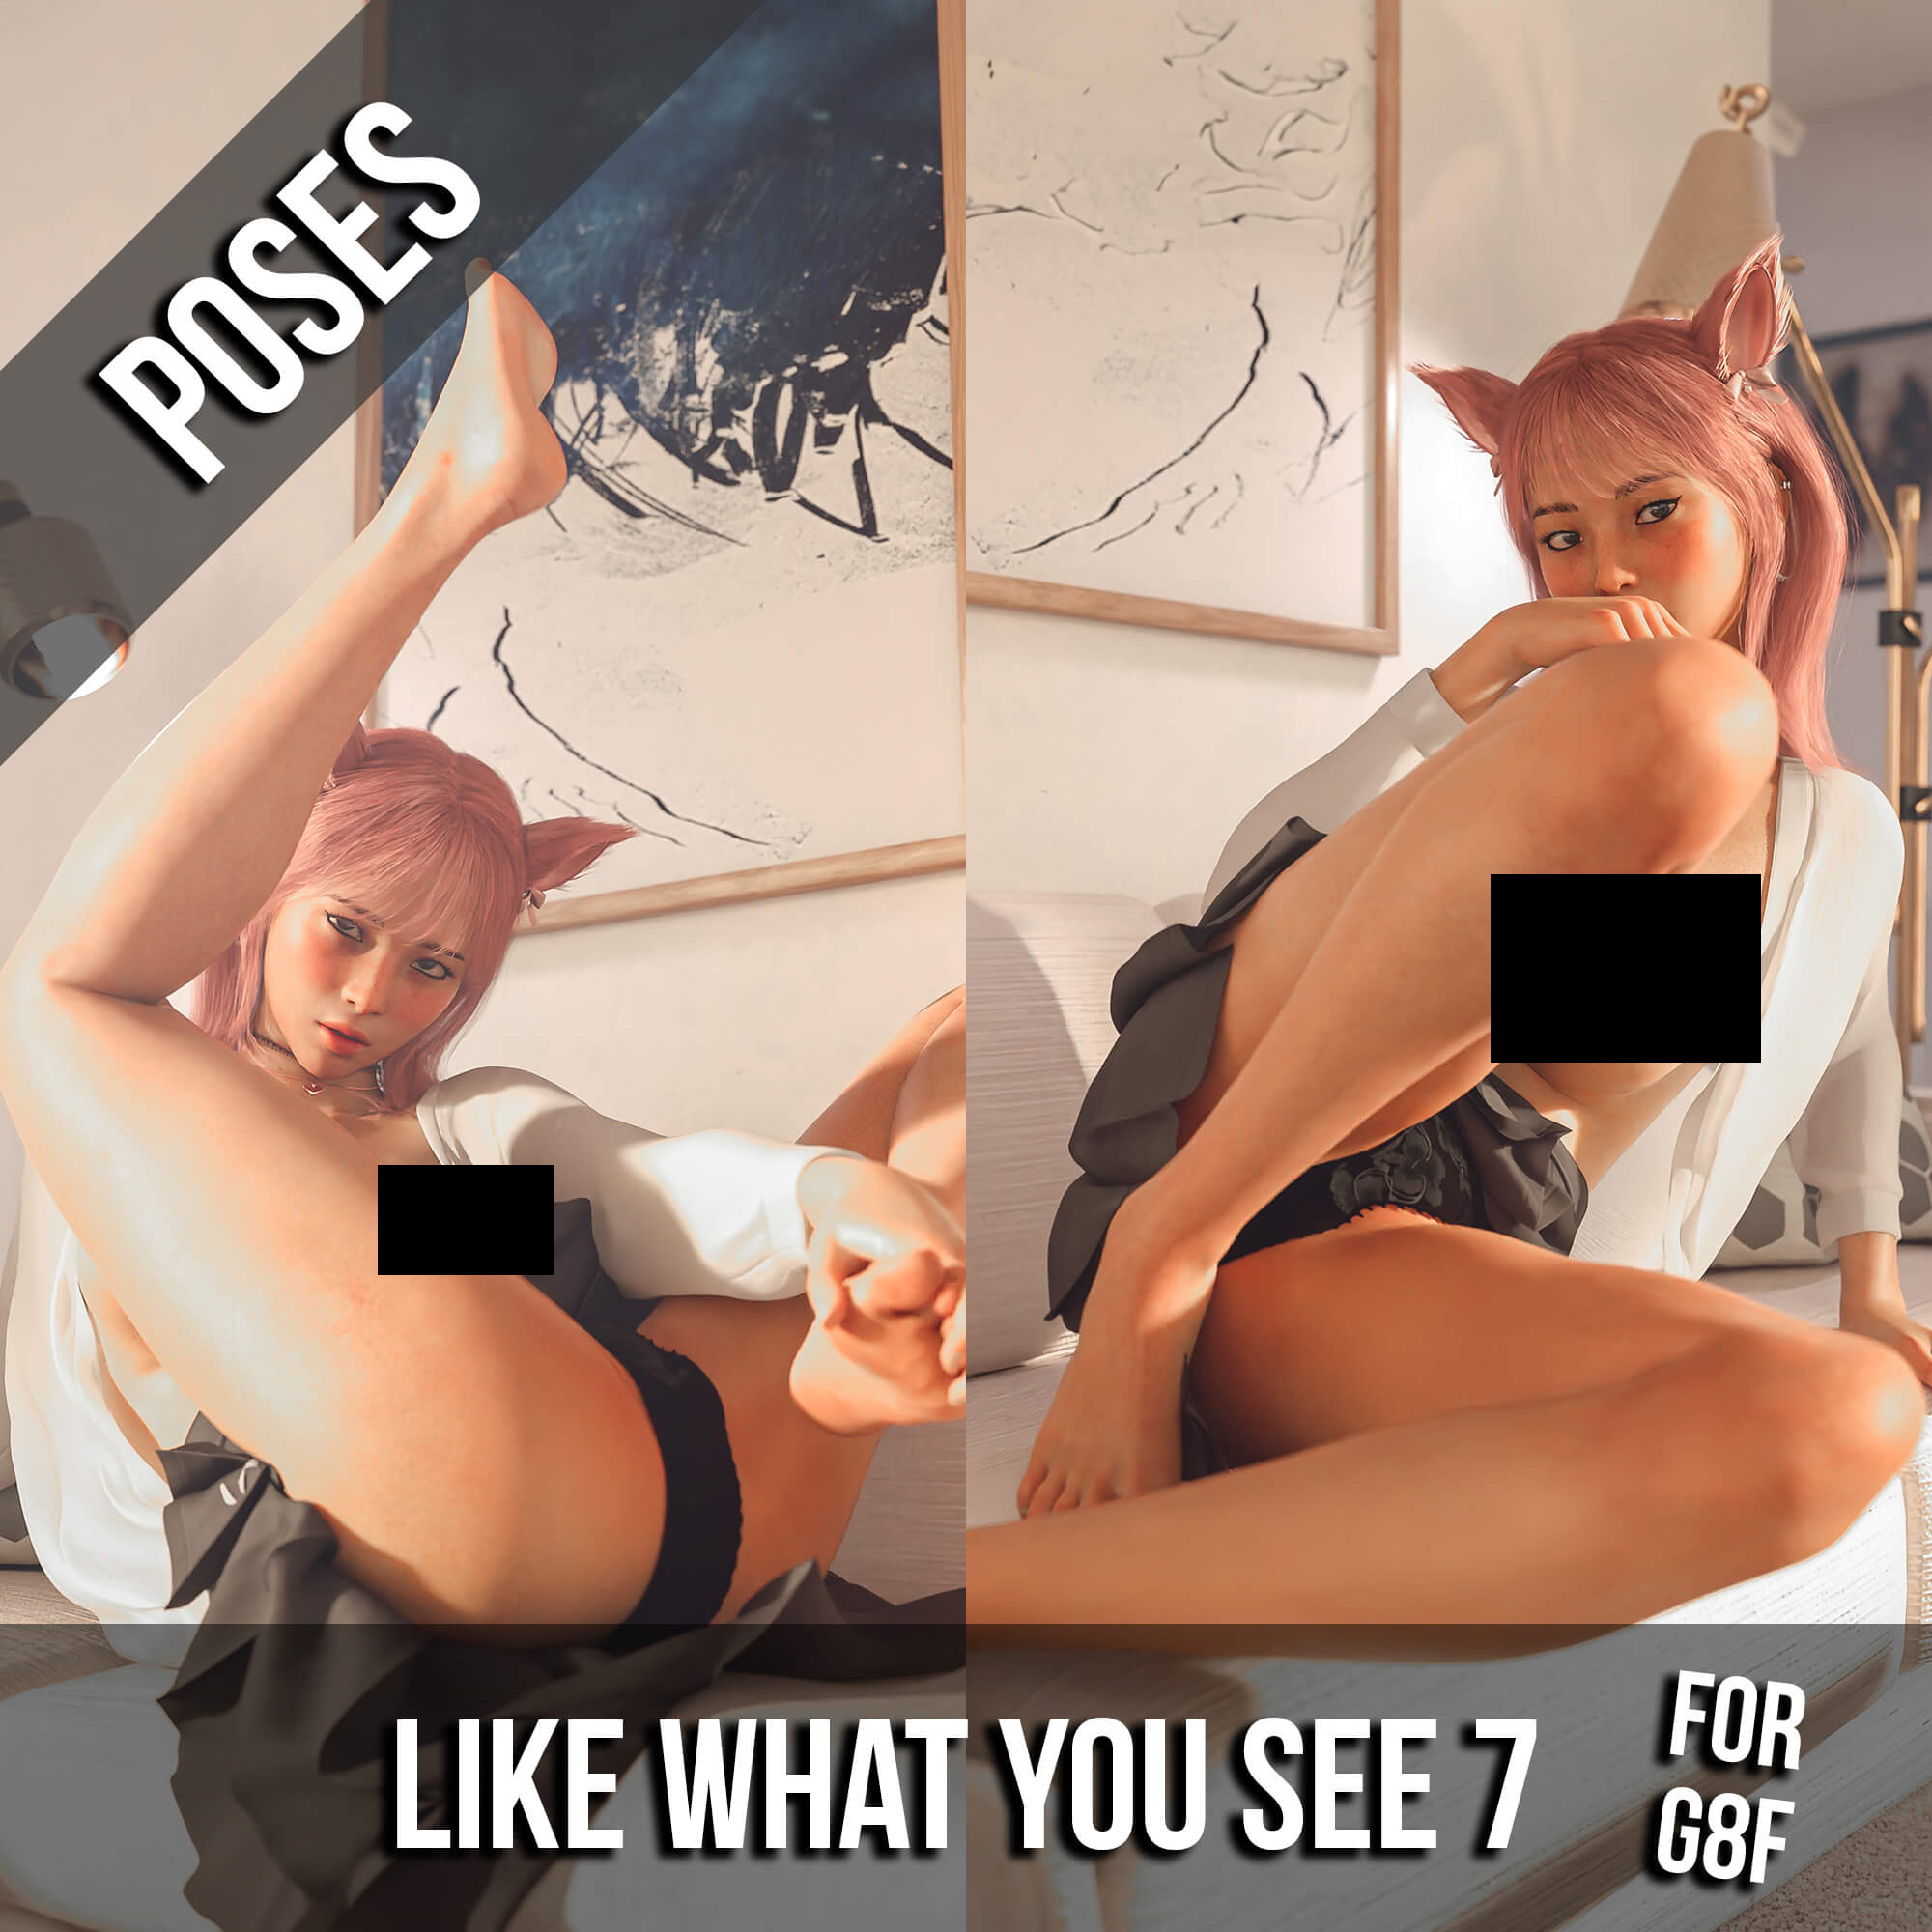 like what you see poses for g8f 7 01162324e31259e8b5